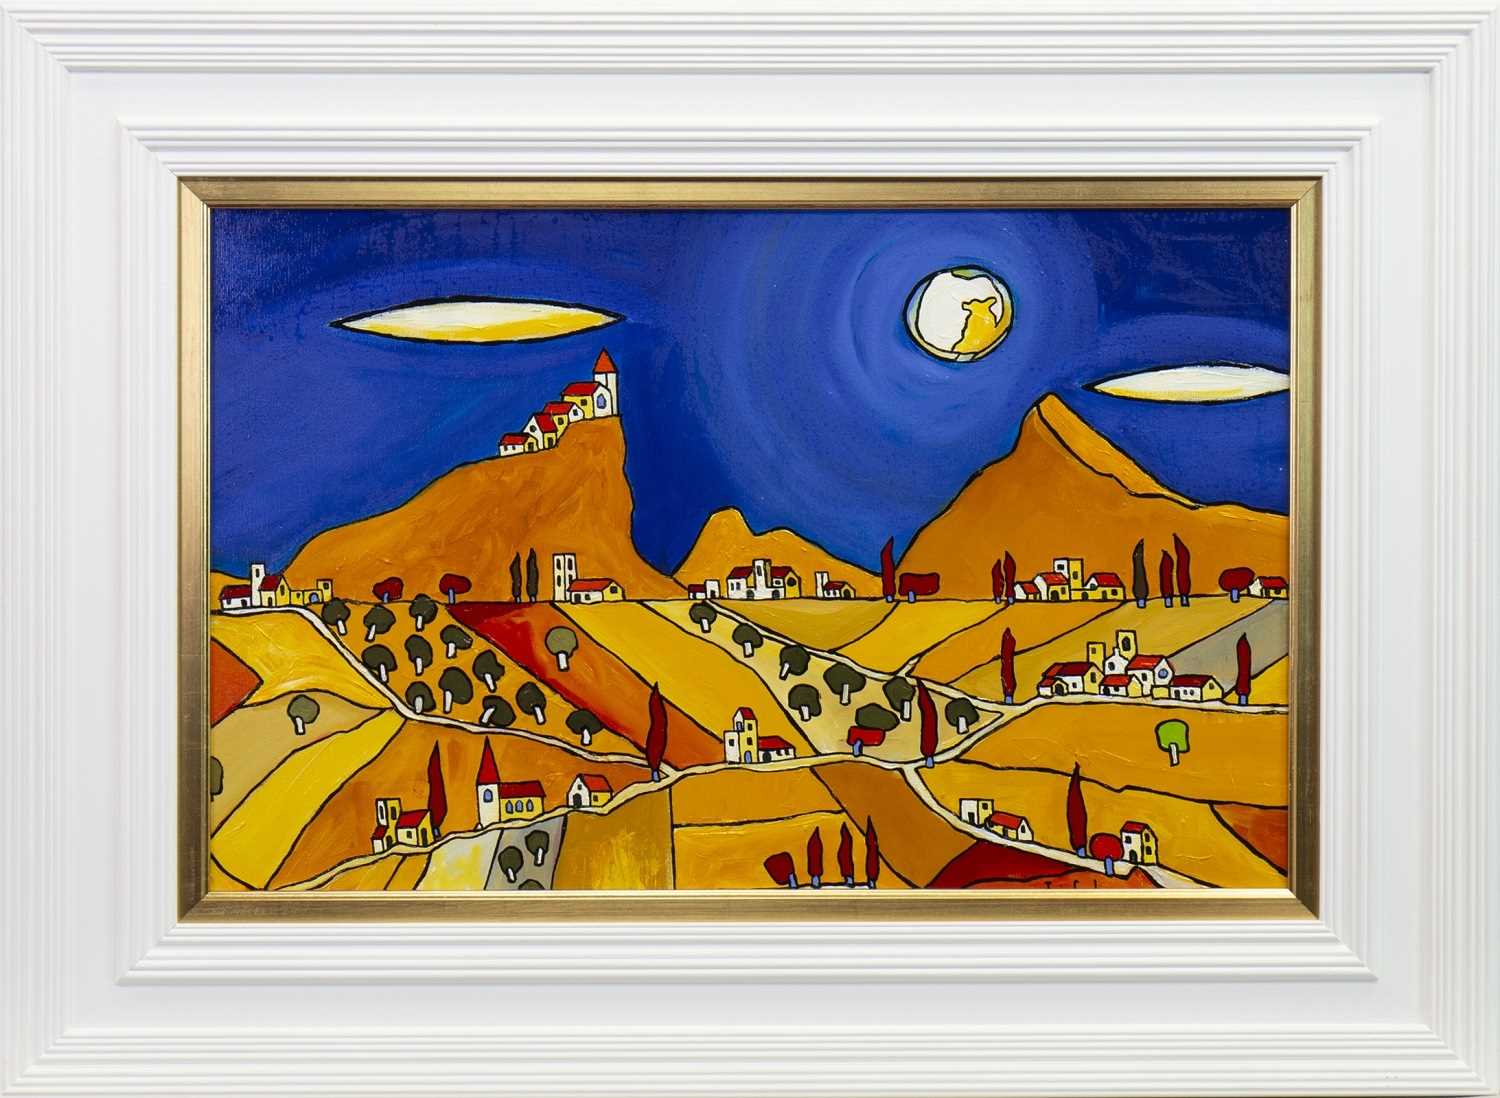 Lot 777 - MOON OVER GALLICIAN LANDSCAPE, AN OIL BY IAIN CARBY